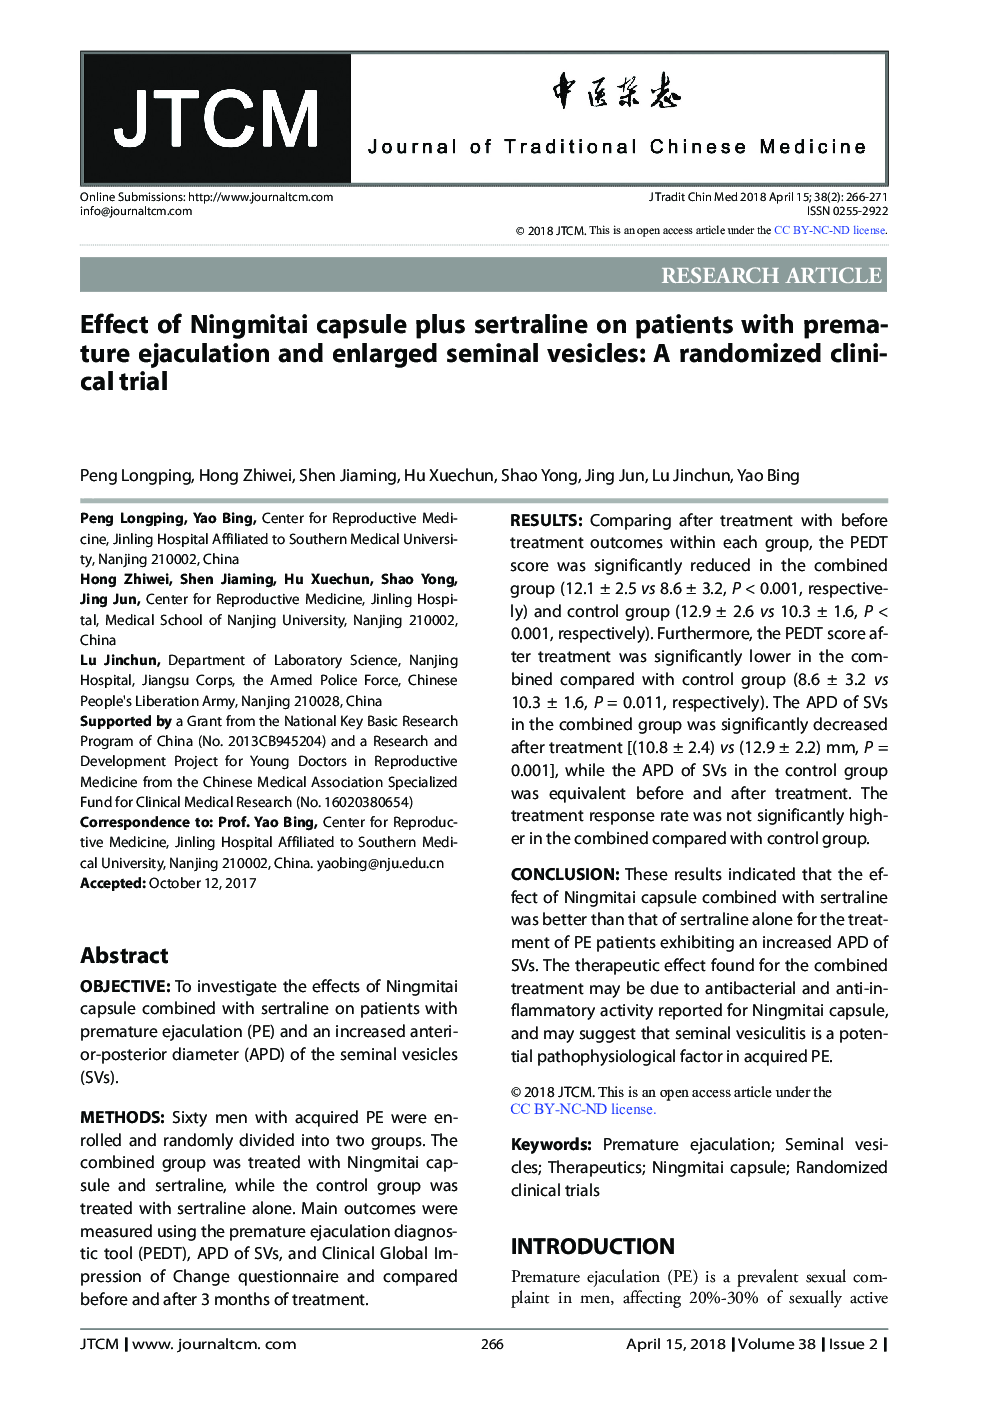 Effect of Ningmitai capsule plus sertraline on patients with premature ejaculation and enlarged seminal vesicles: A randomized clinical trial